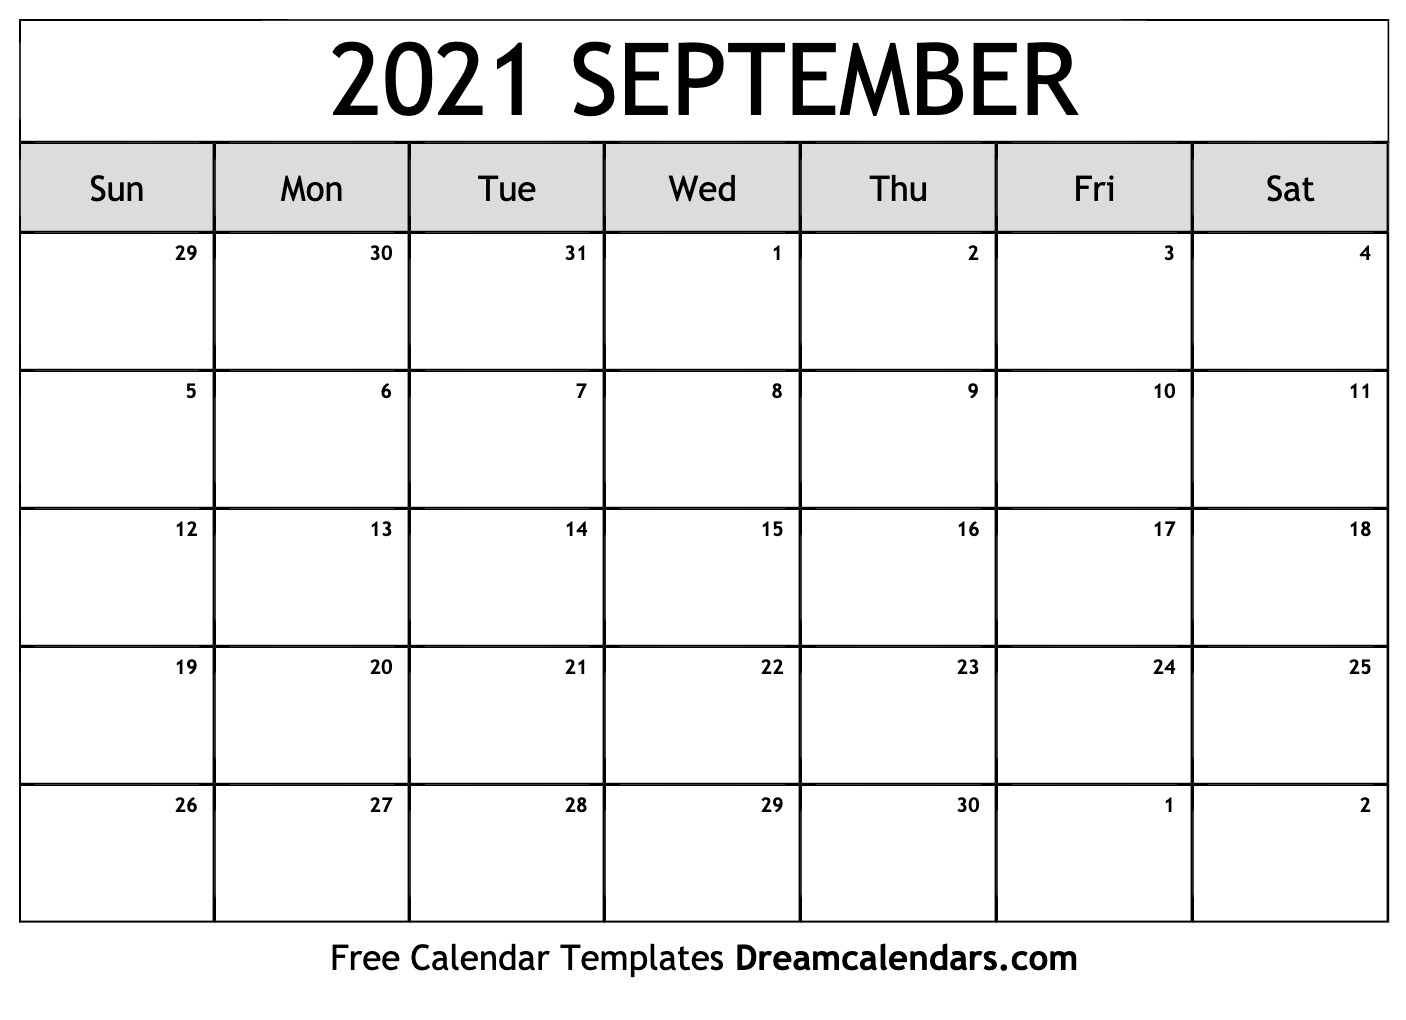 Print Free 2021 Calendar Without Downloading | Calendar Printables Free Blank Printable Calendar September 2020 To August 2021